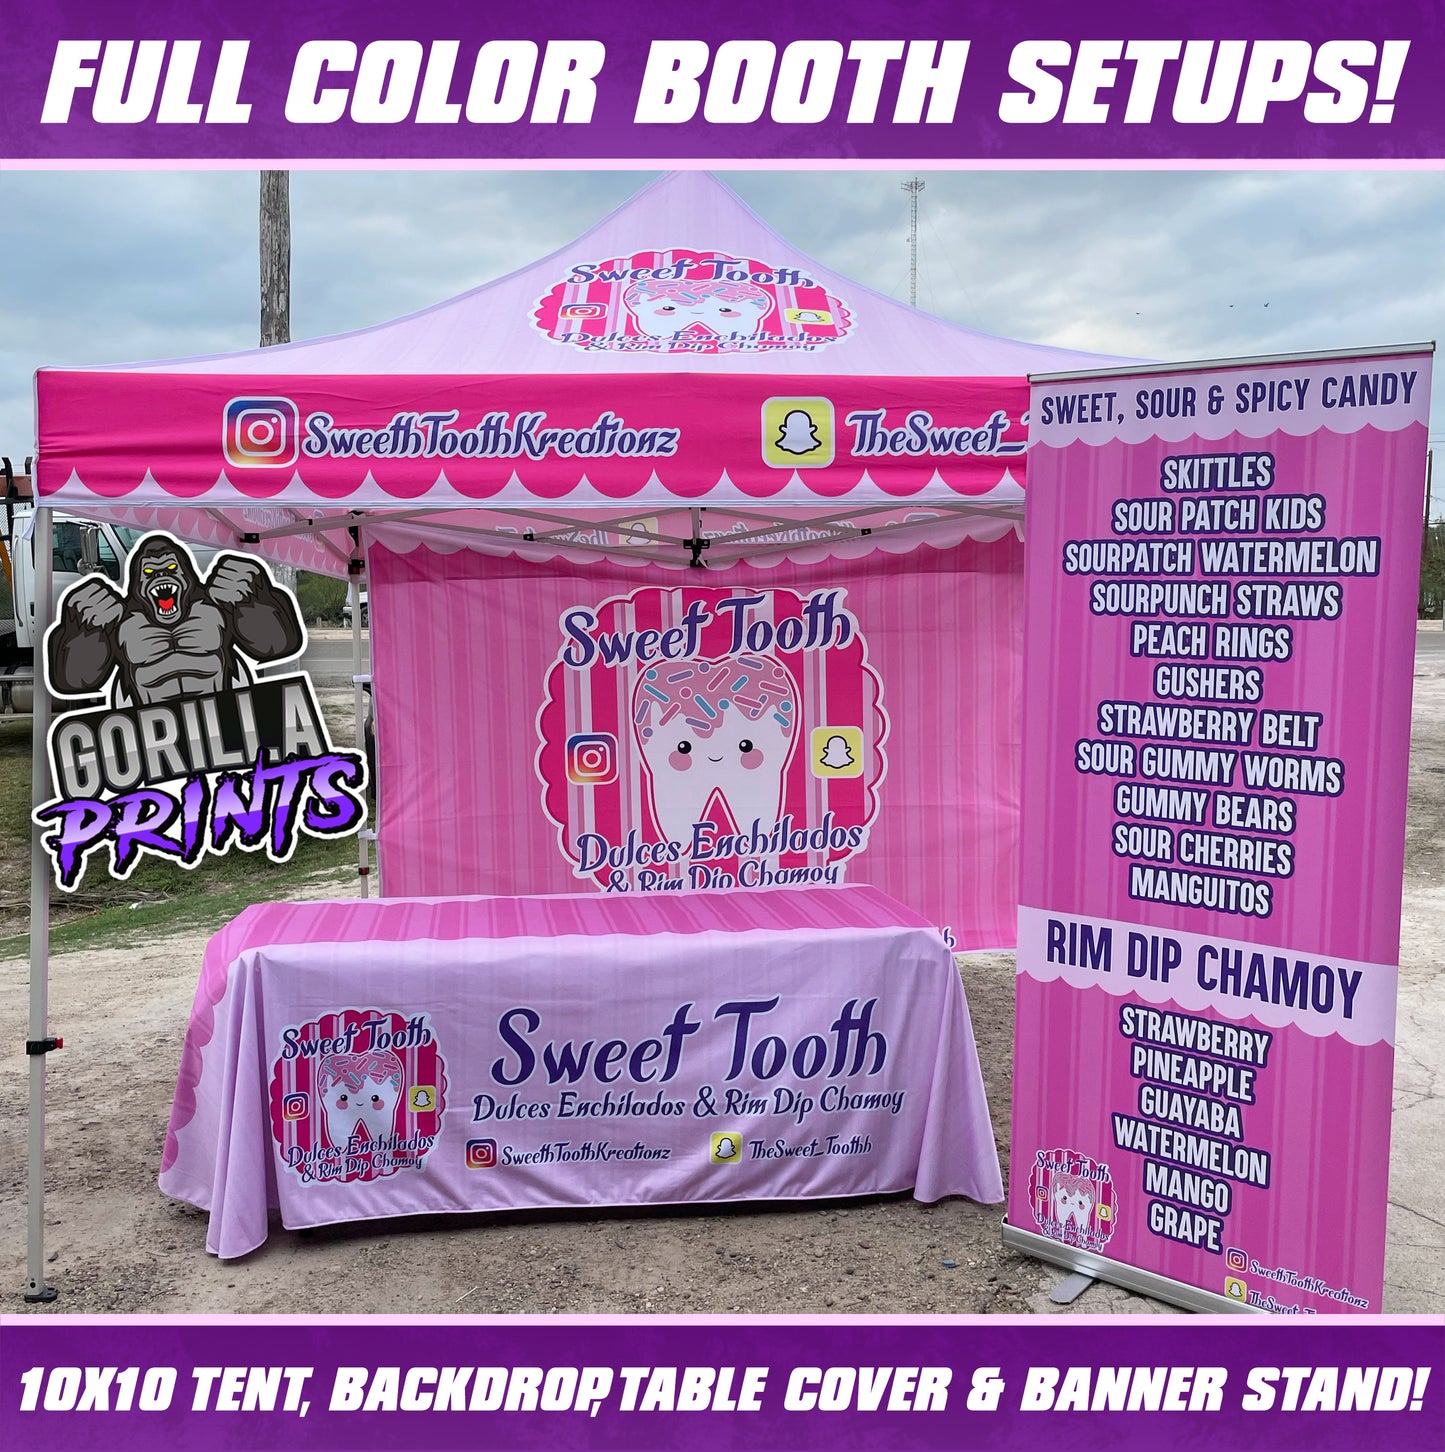 Full Color Booth Setup